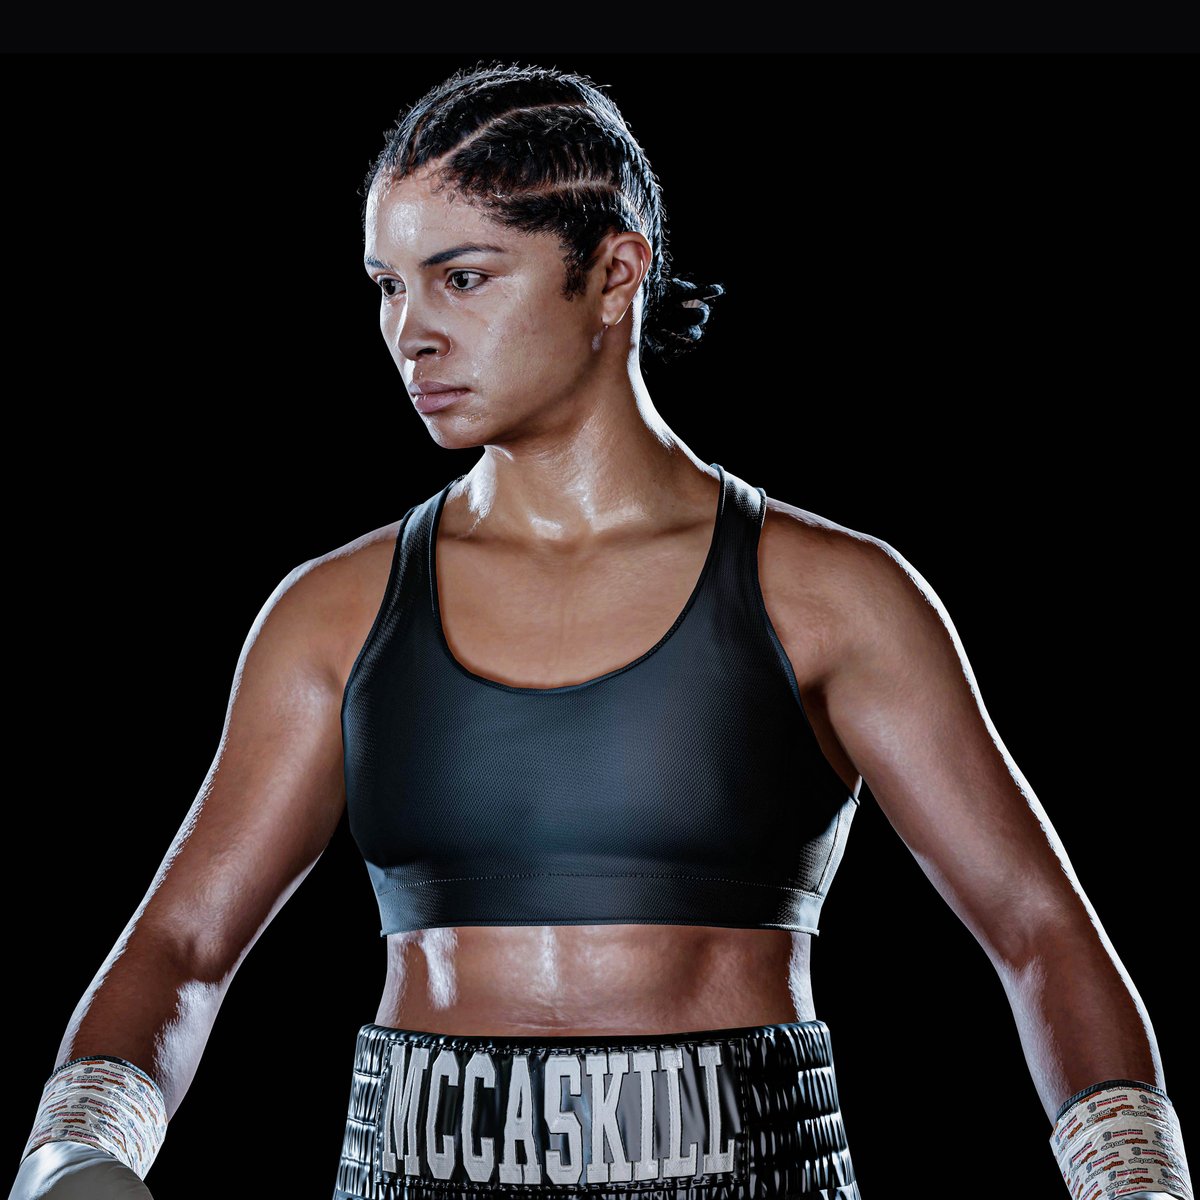 Jessica McCaskill (@jaydi_mac), the undisputed welterweight world champion will be available on day 1 of early access in Undisputed! #BecomeUndisputed 🥊